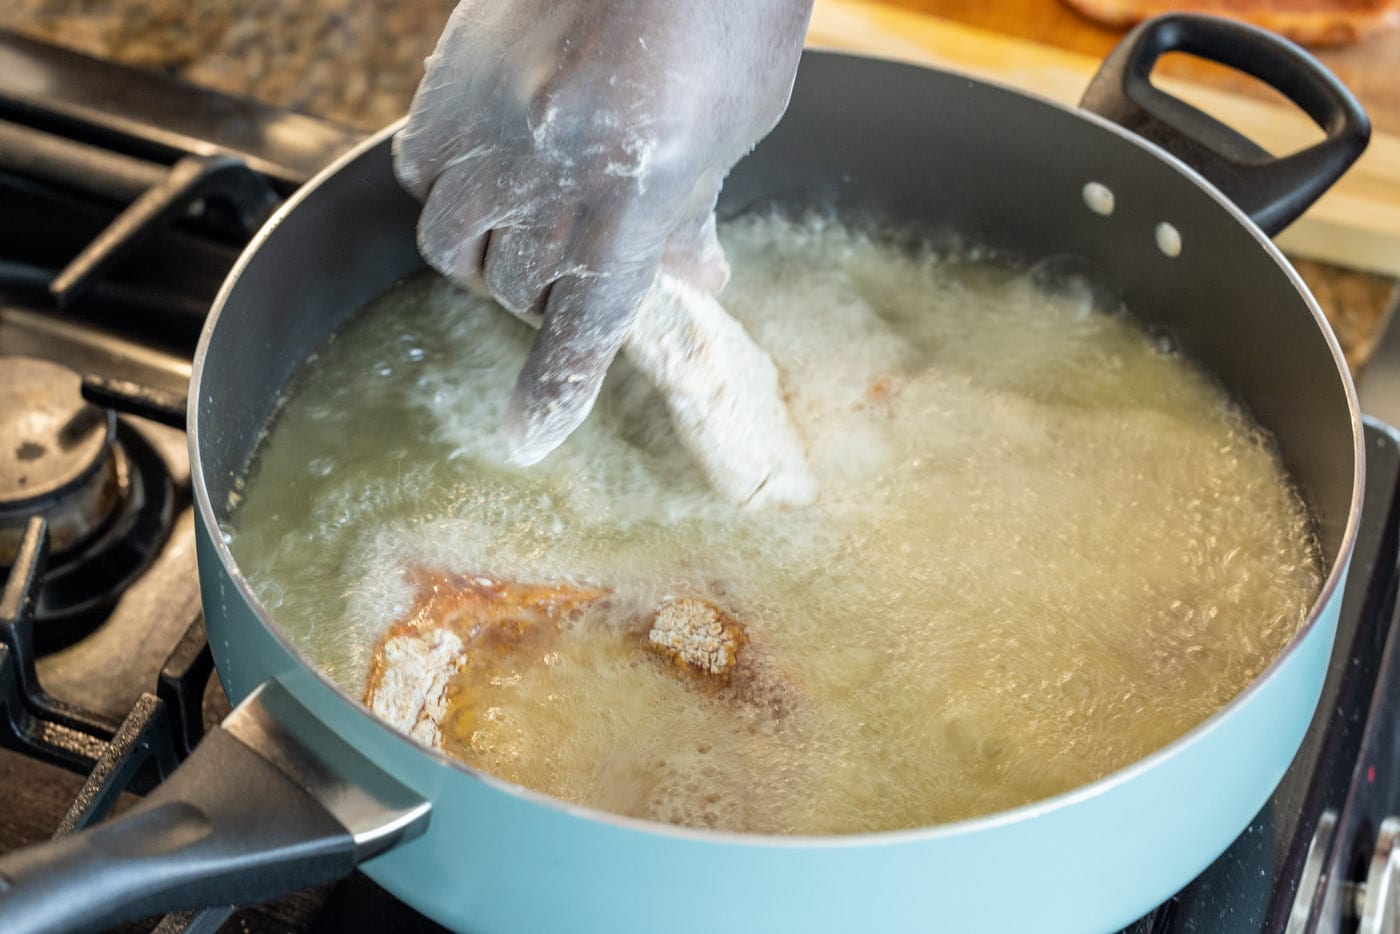 placing pork chop into a skillet with hot oil